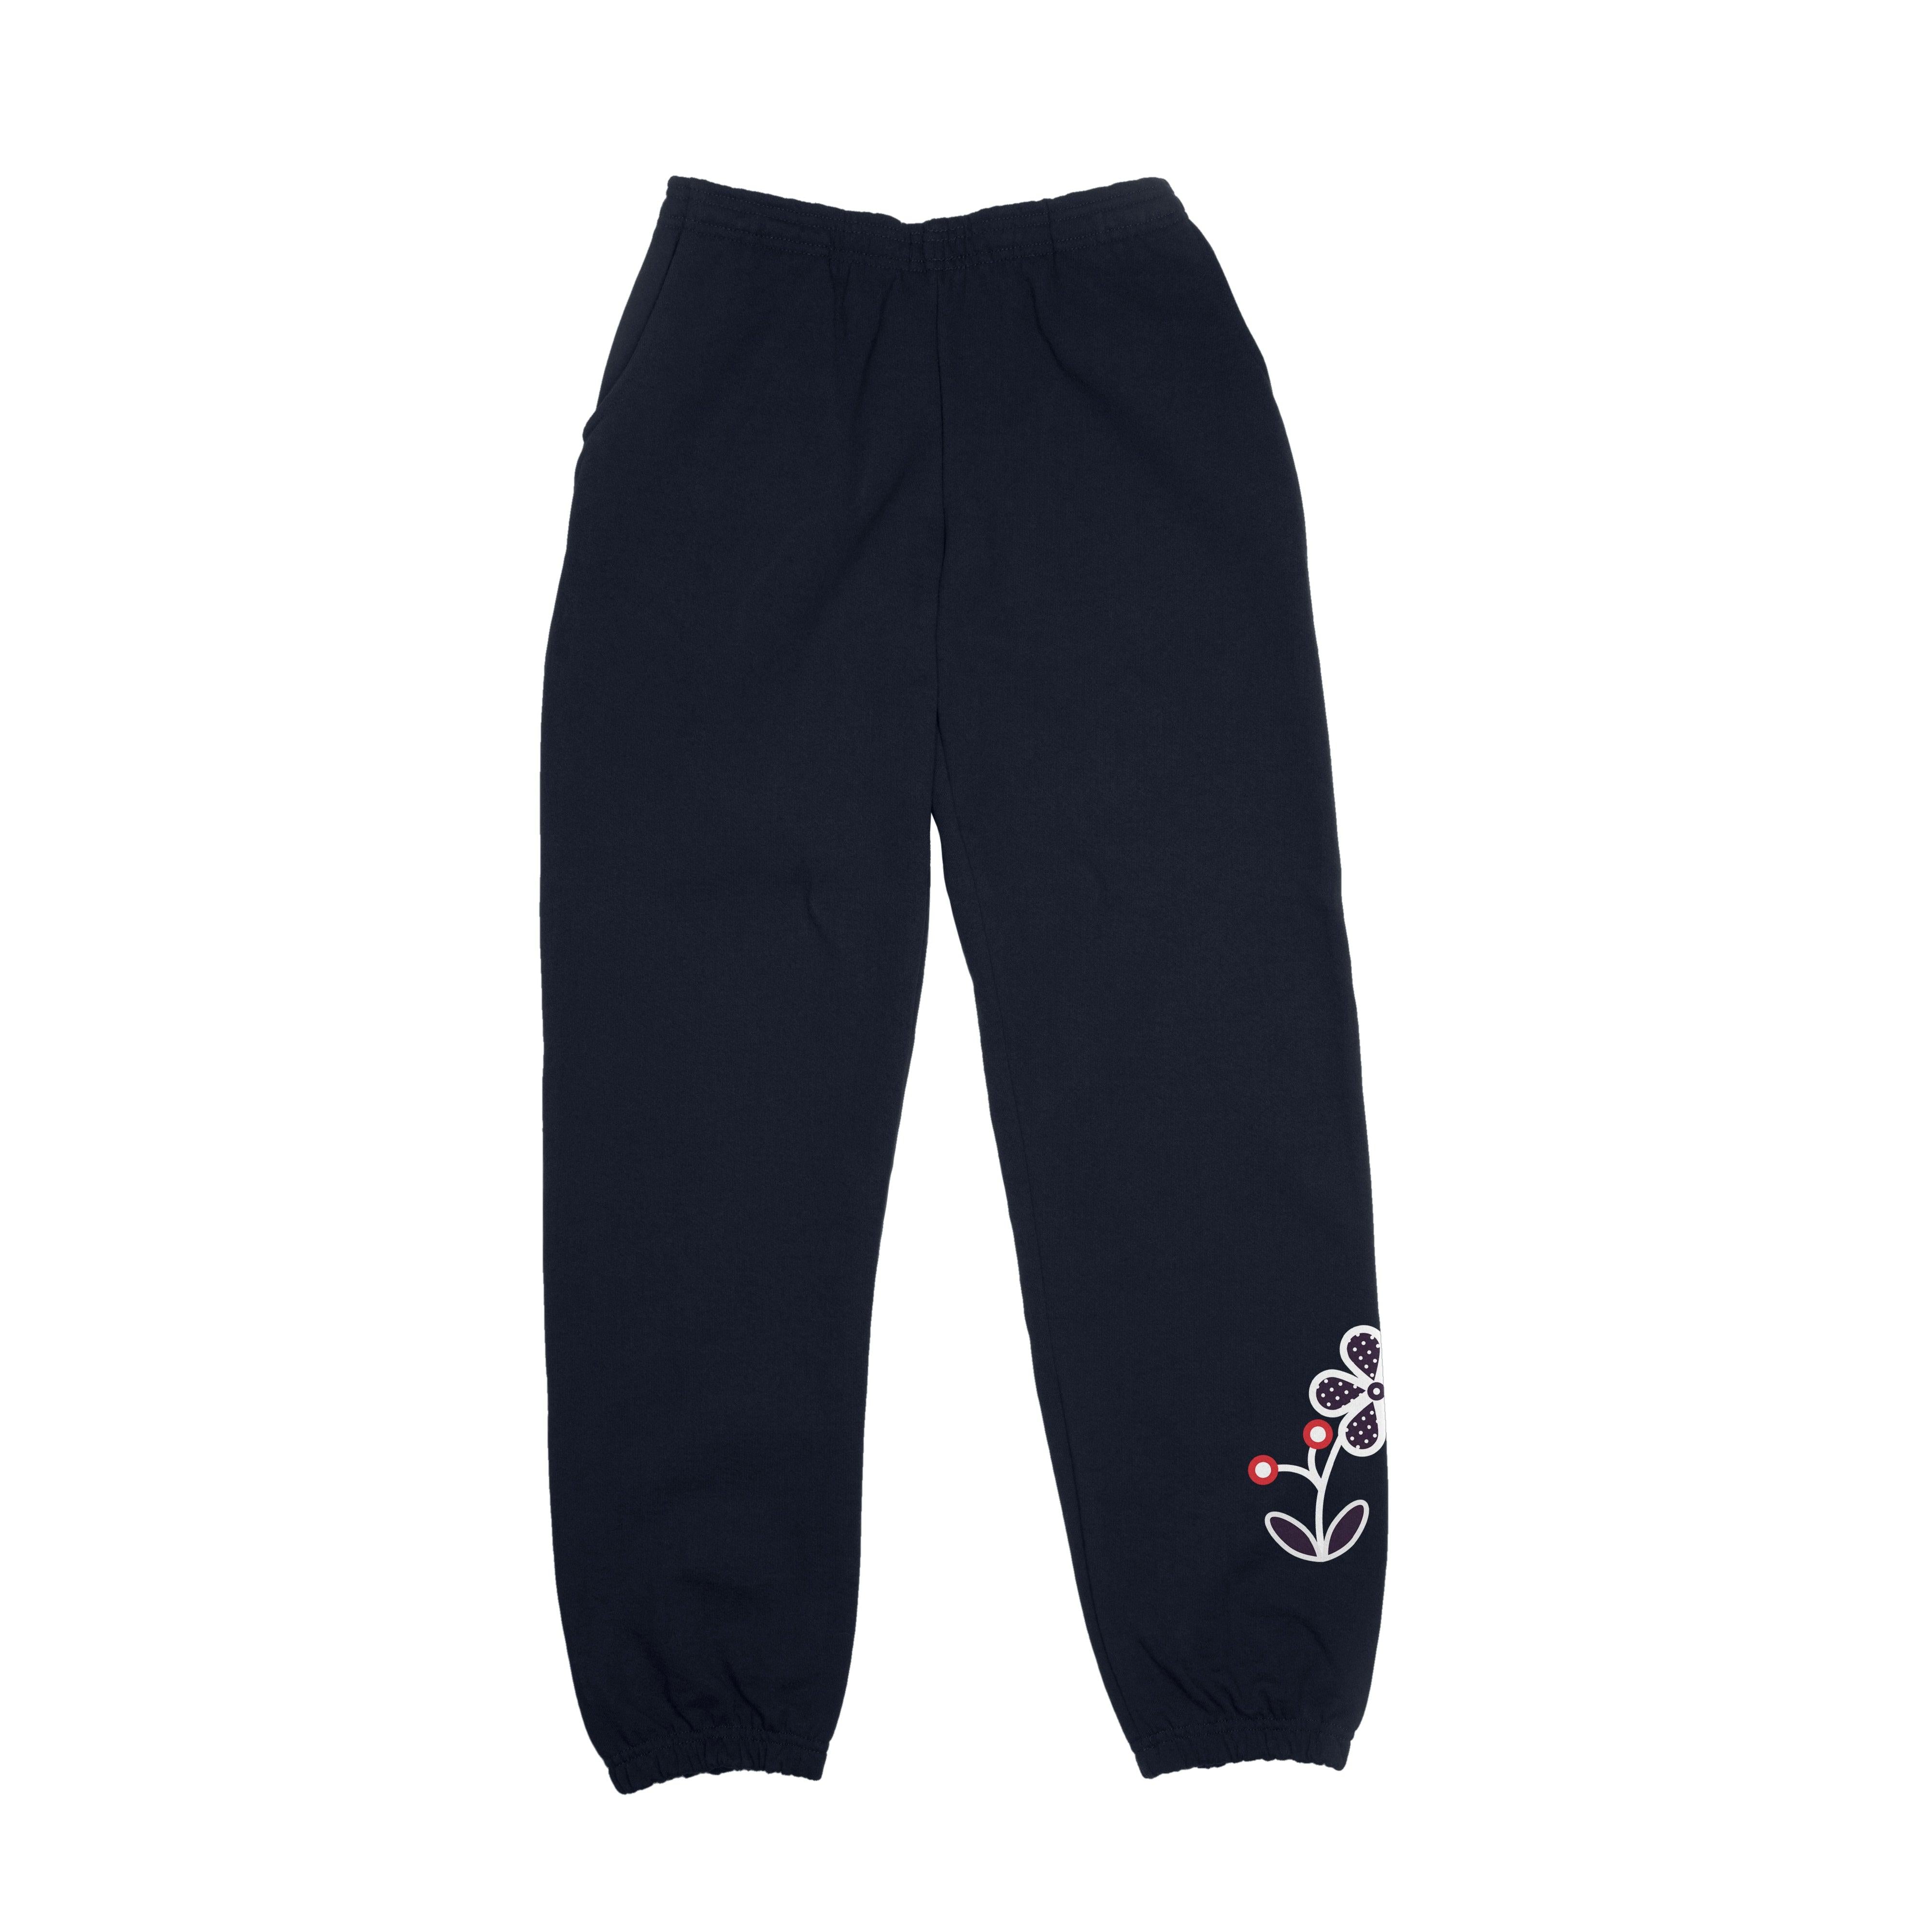 Bloom Sweatpants - Navy - SECTION 35